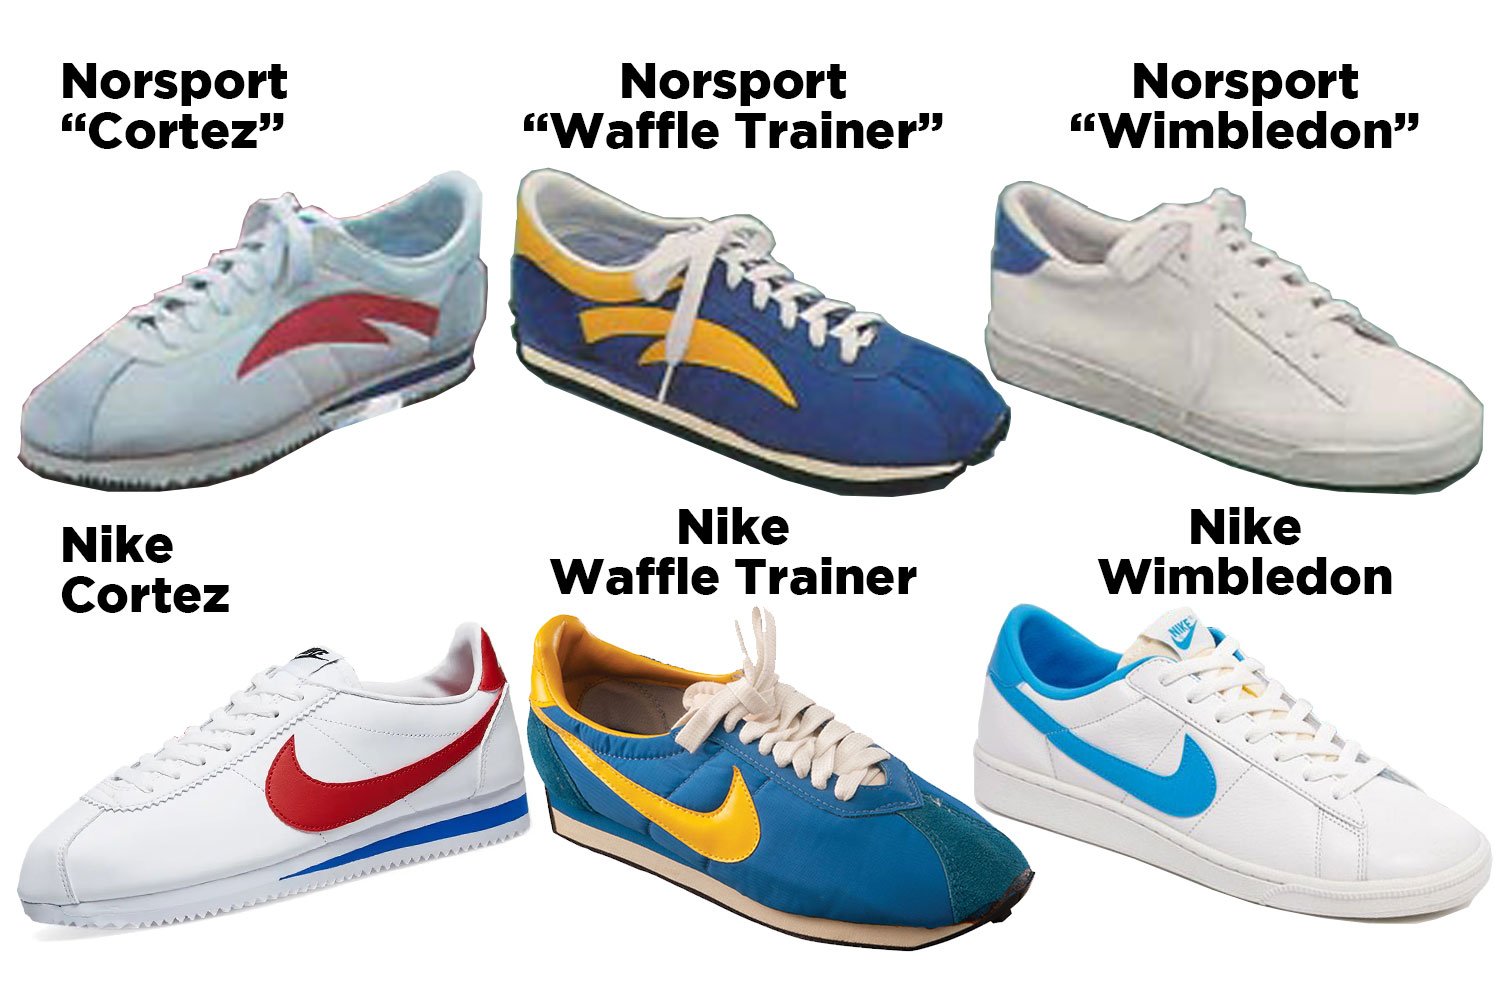 conjunción preferible directorio The Deffest®. A vintage and retro sneaker blog. — Nike B-Sides: Connecting  the Dots to Nike's Private Labeled sneakers - Part I Norsport Brand